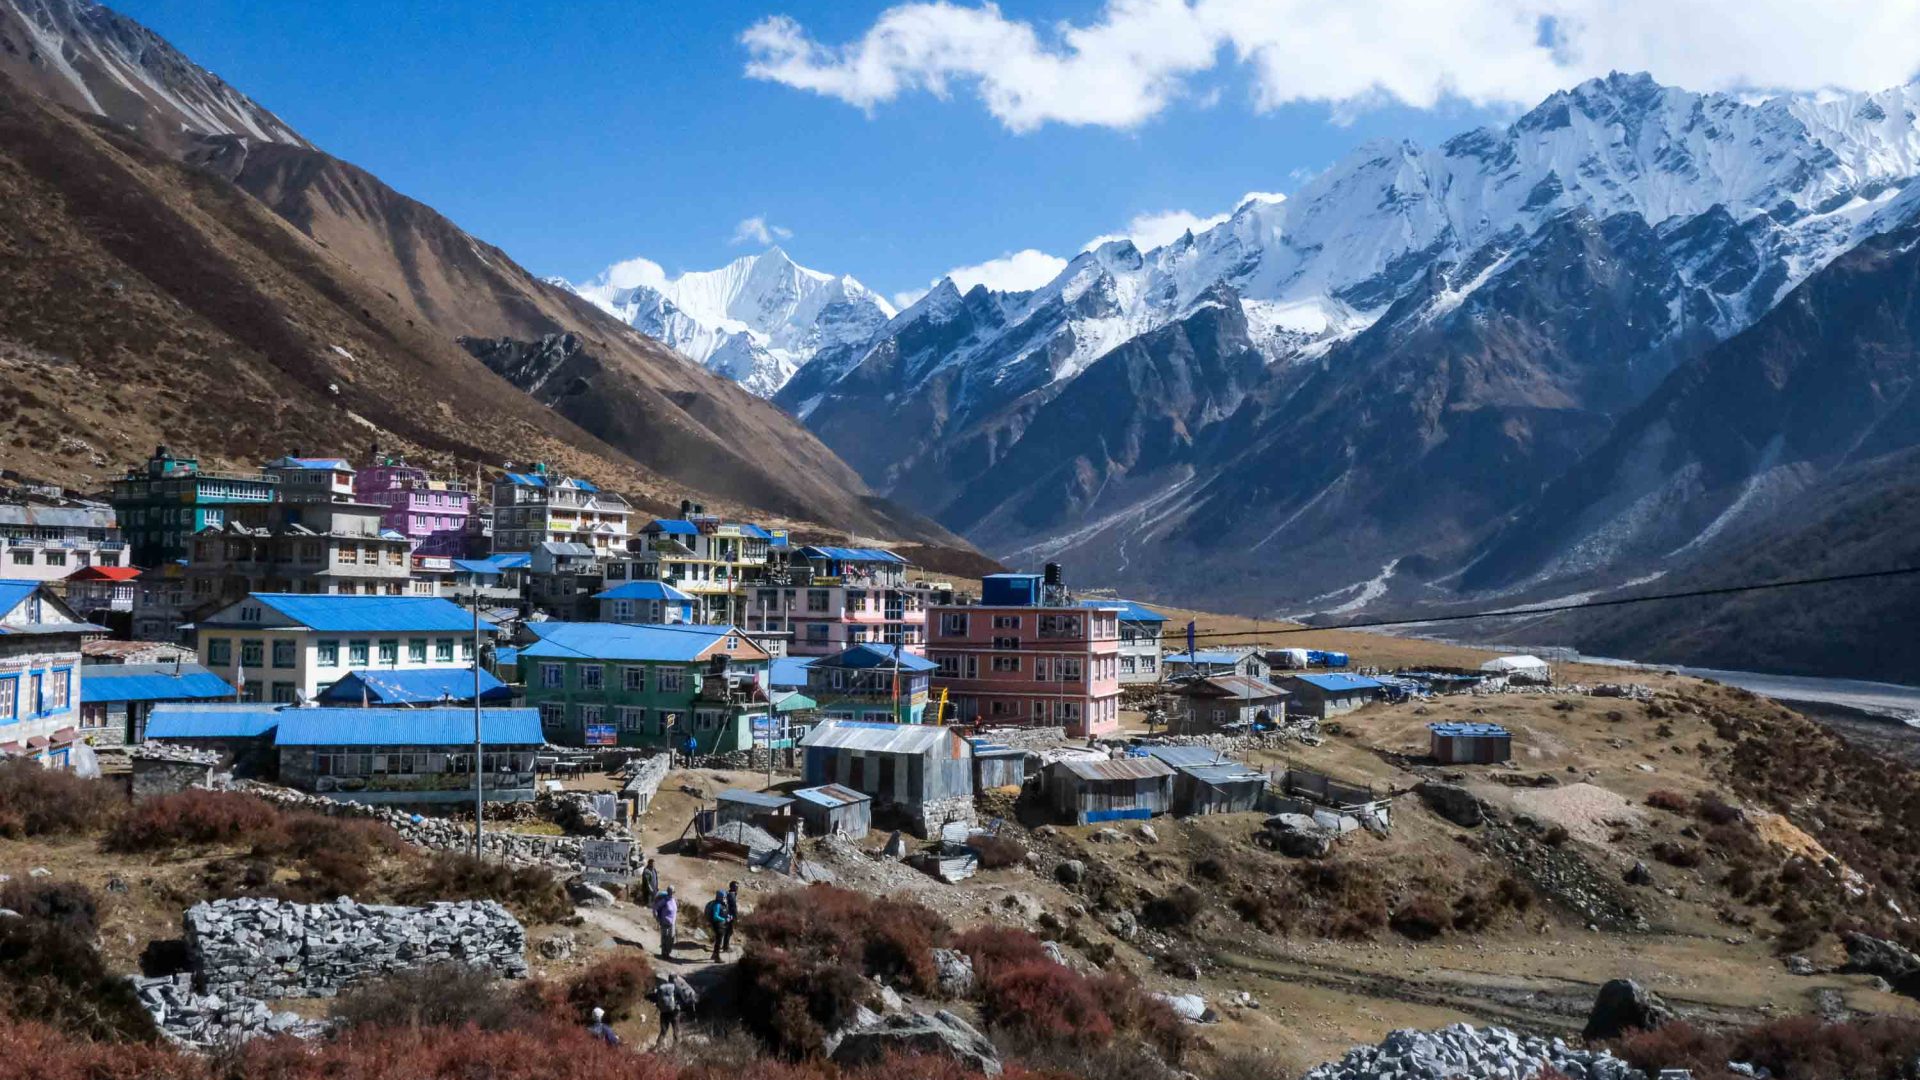 Houses in Langtang village are surrounded by mountains.